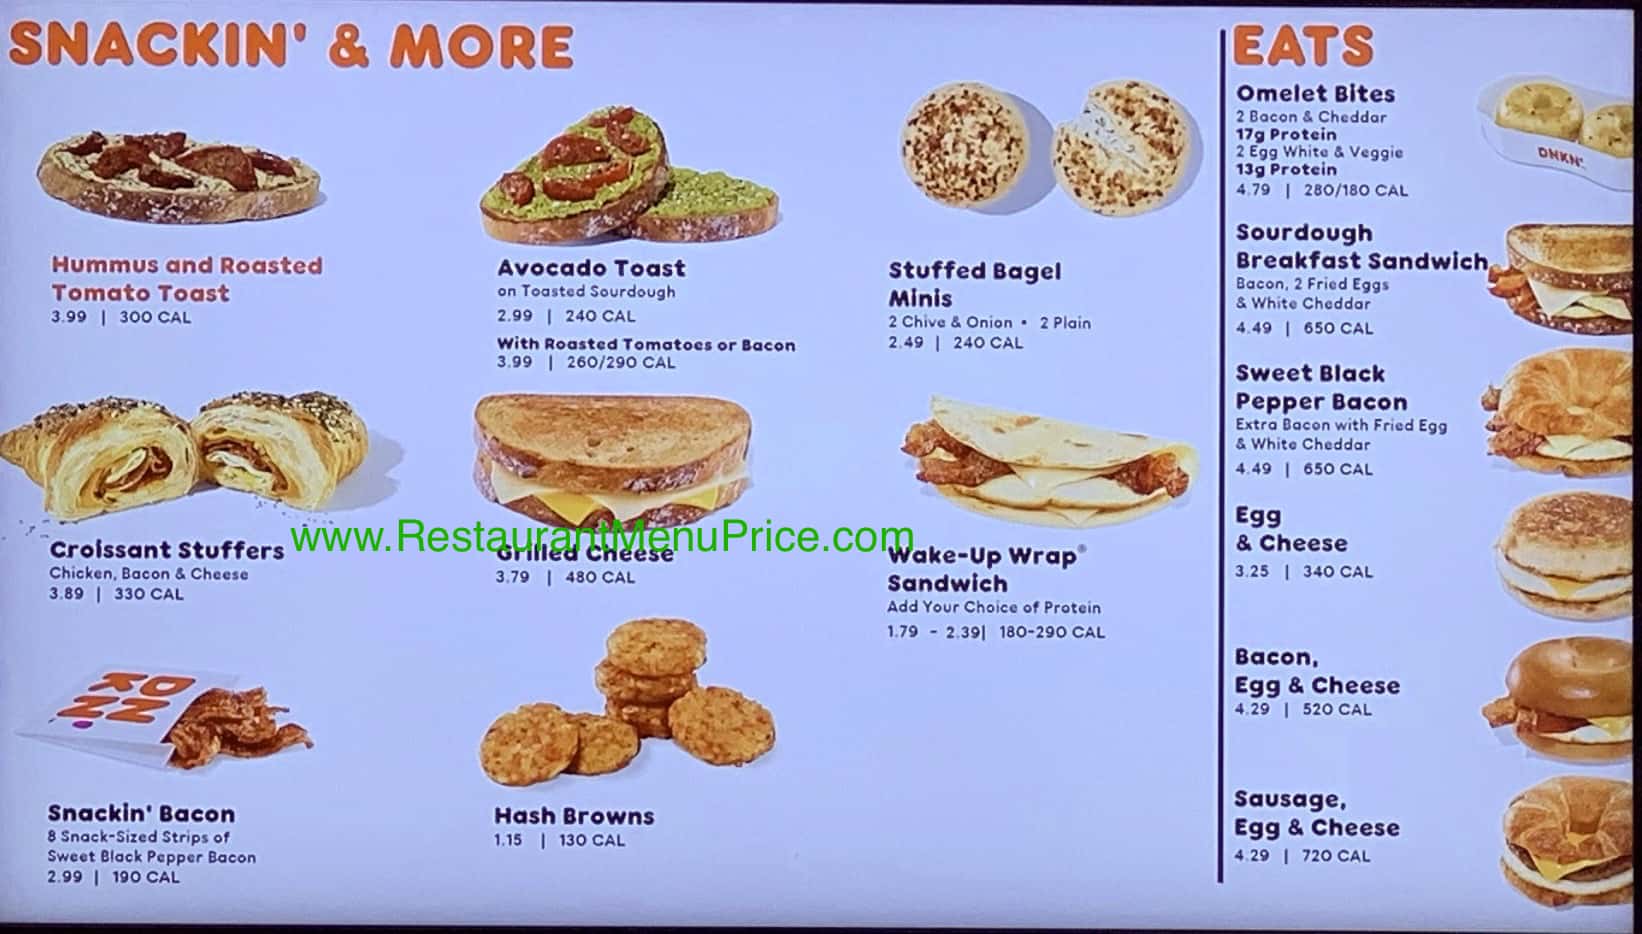 Dunkin' Donuts West Palm Beach Snacking and Eats Menu